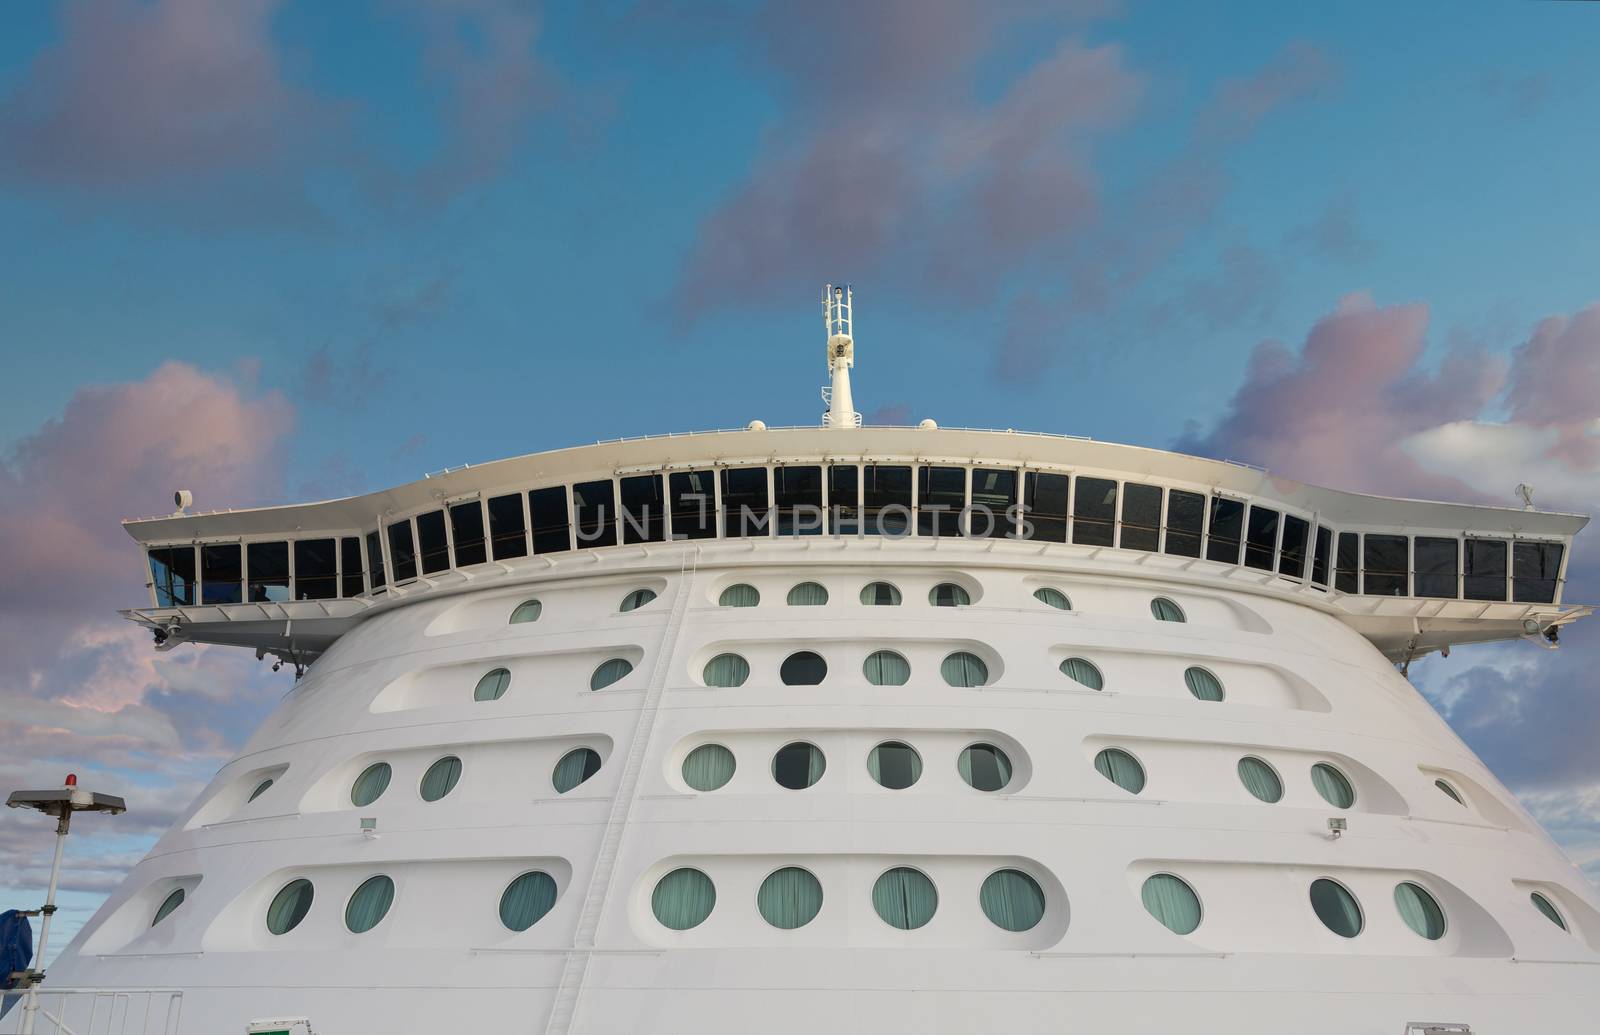 Front of a massive luxury cruise ship with round portholes